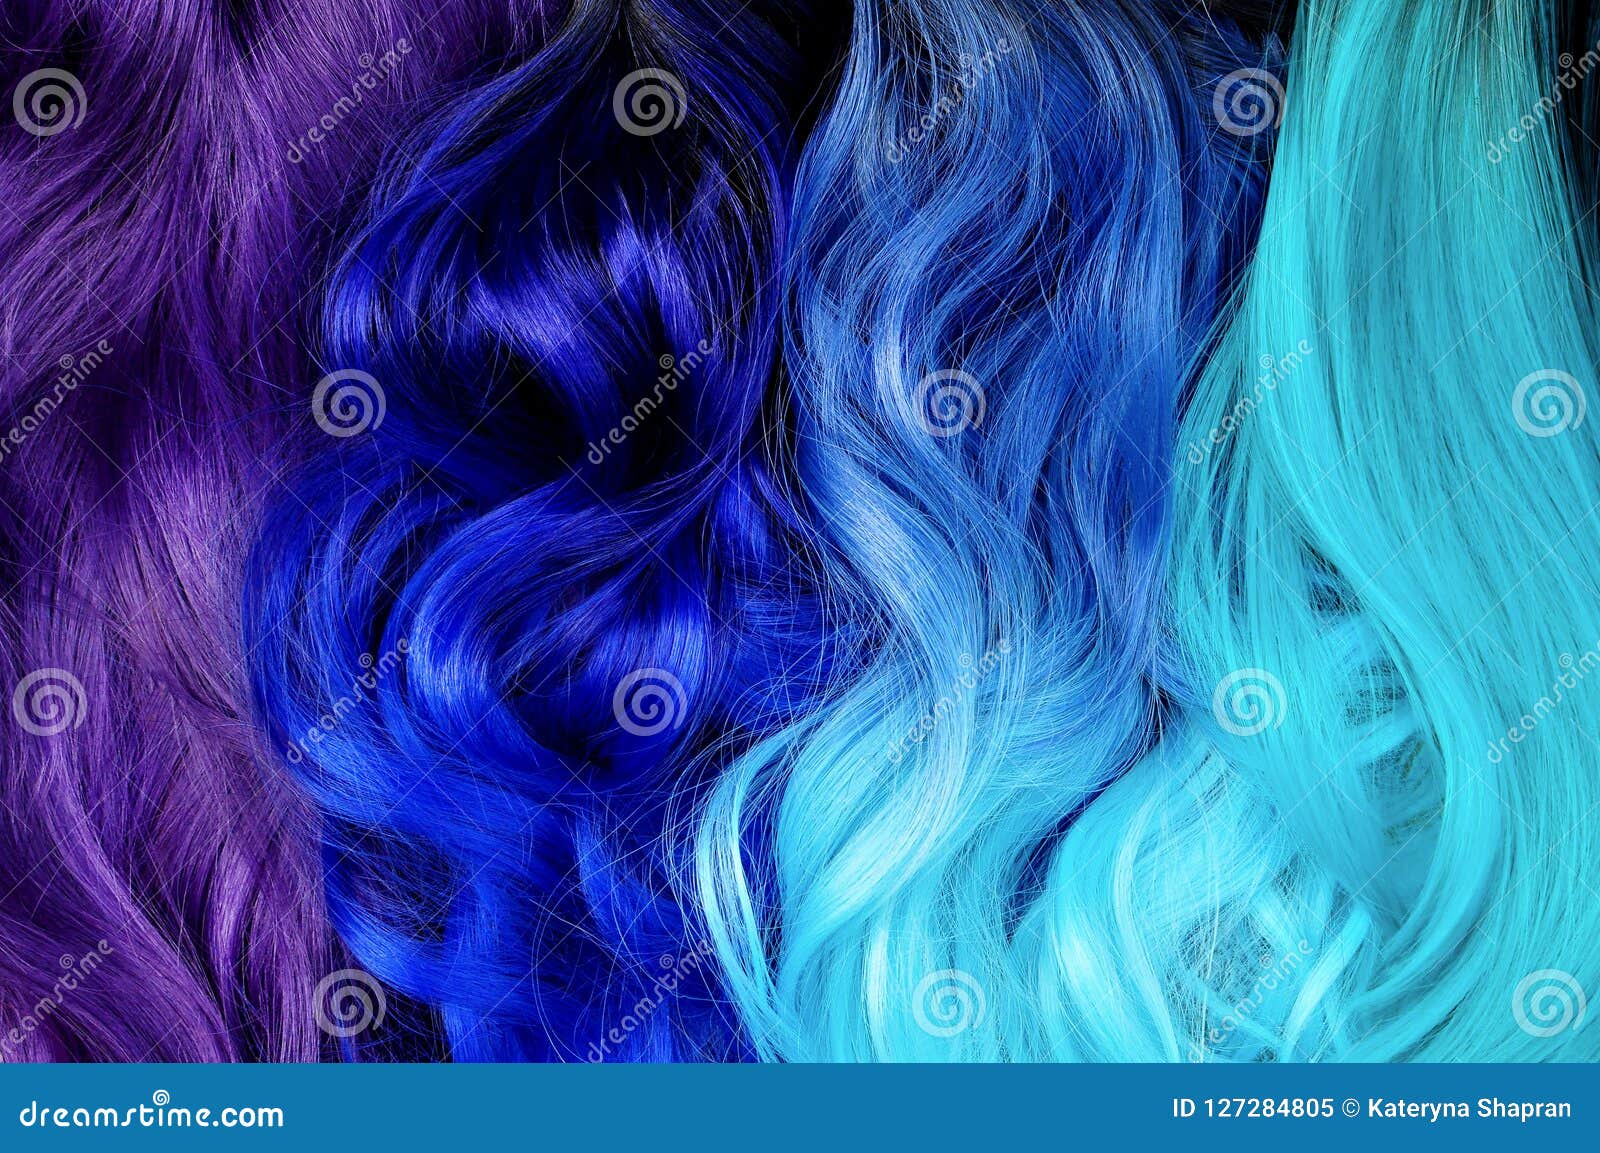 turquoise blue ombre dyed hair